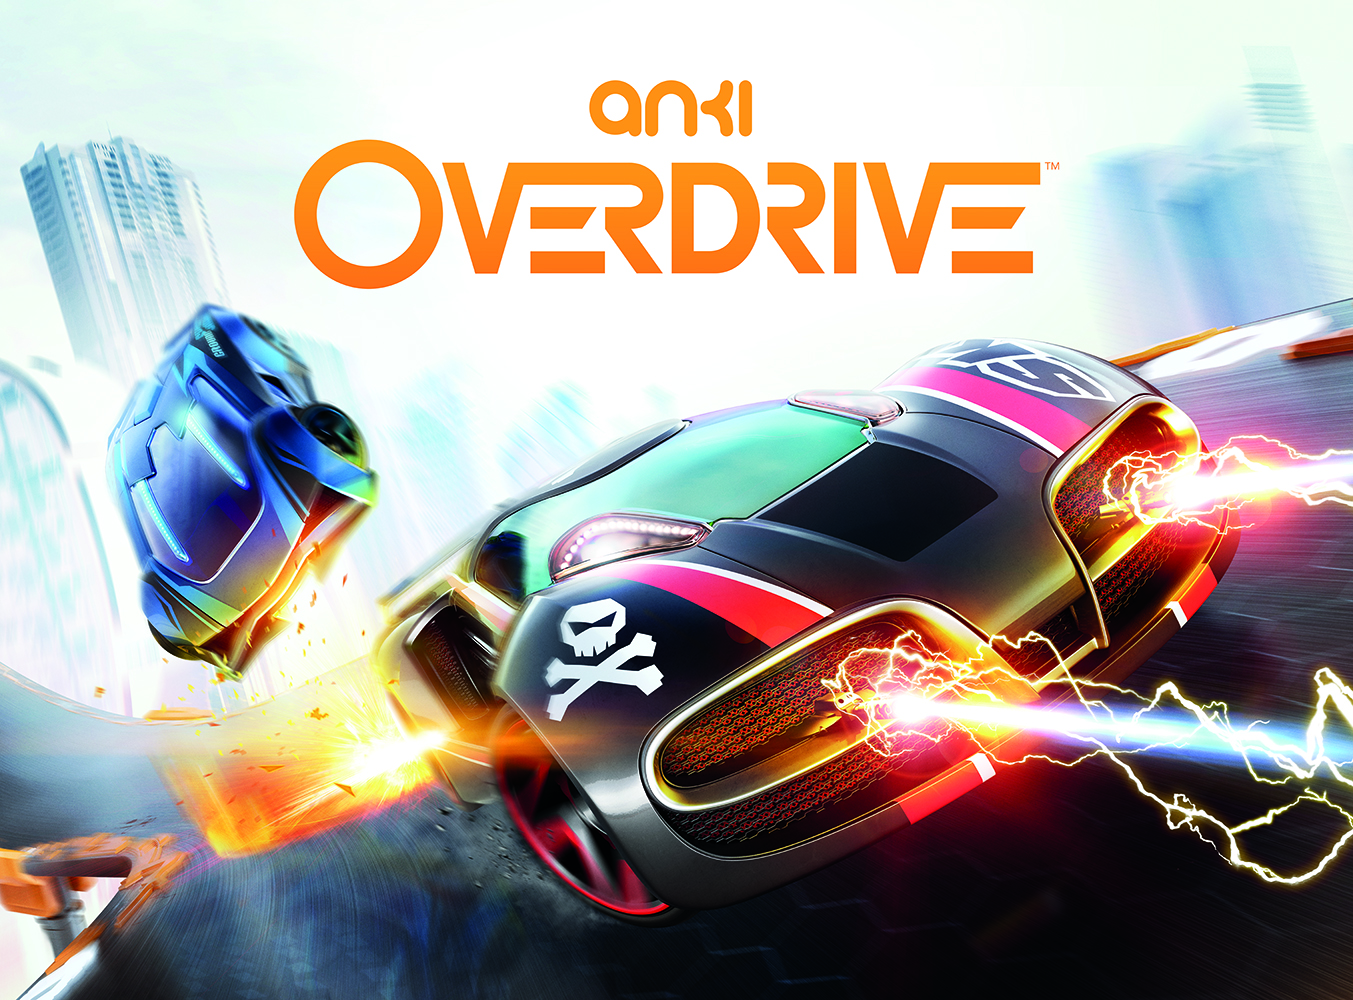 Over Drive #22